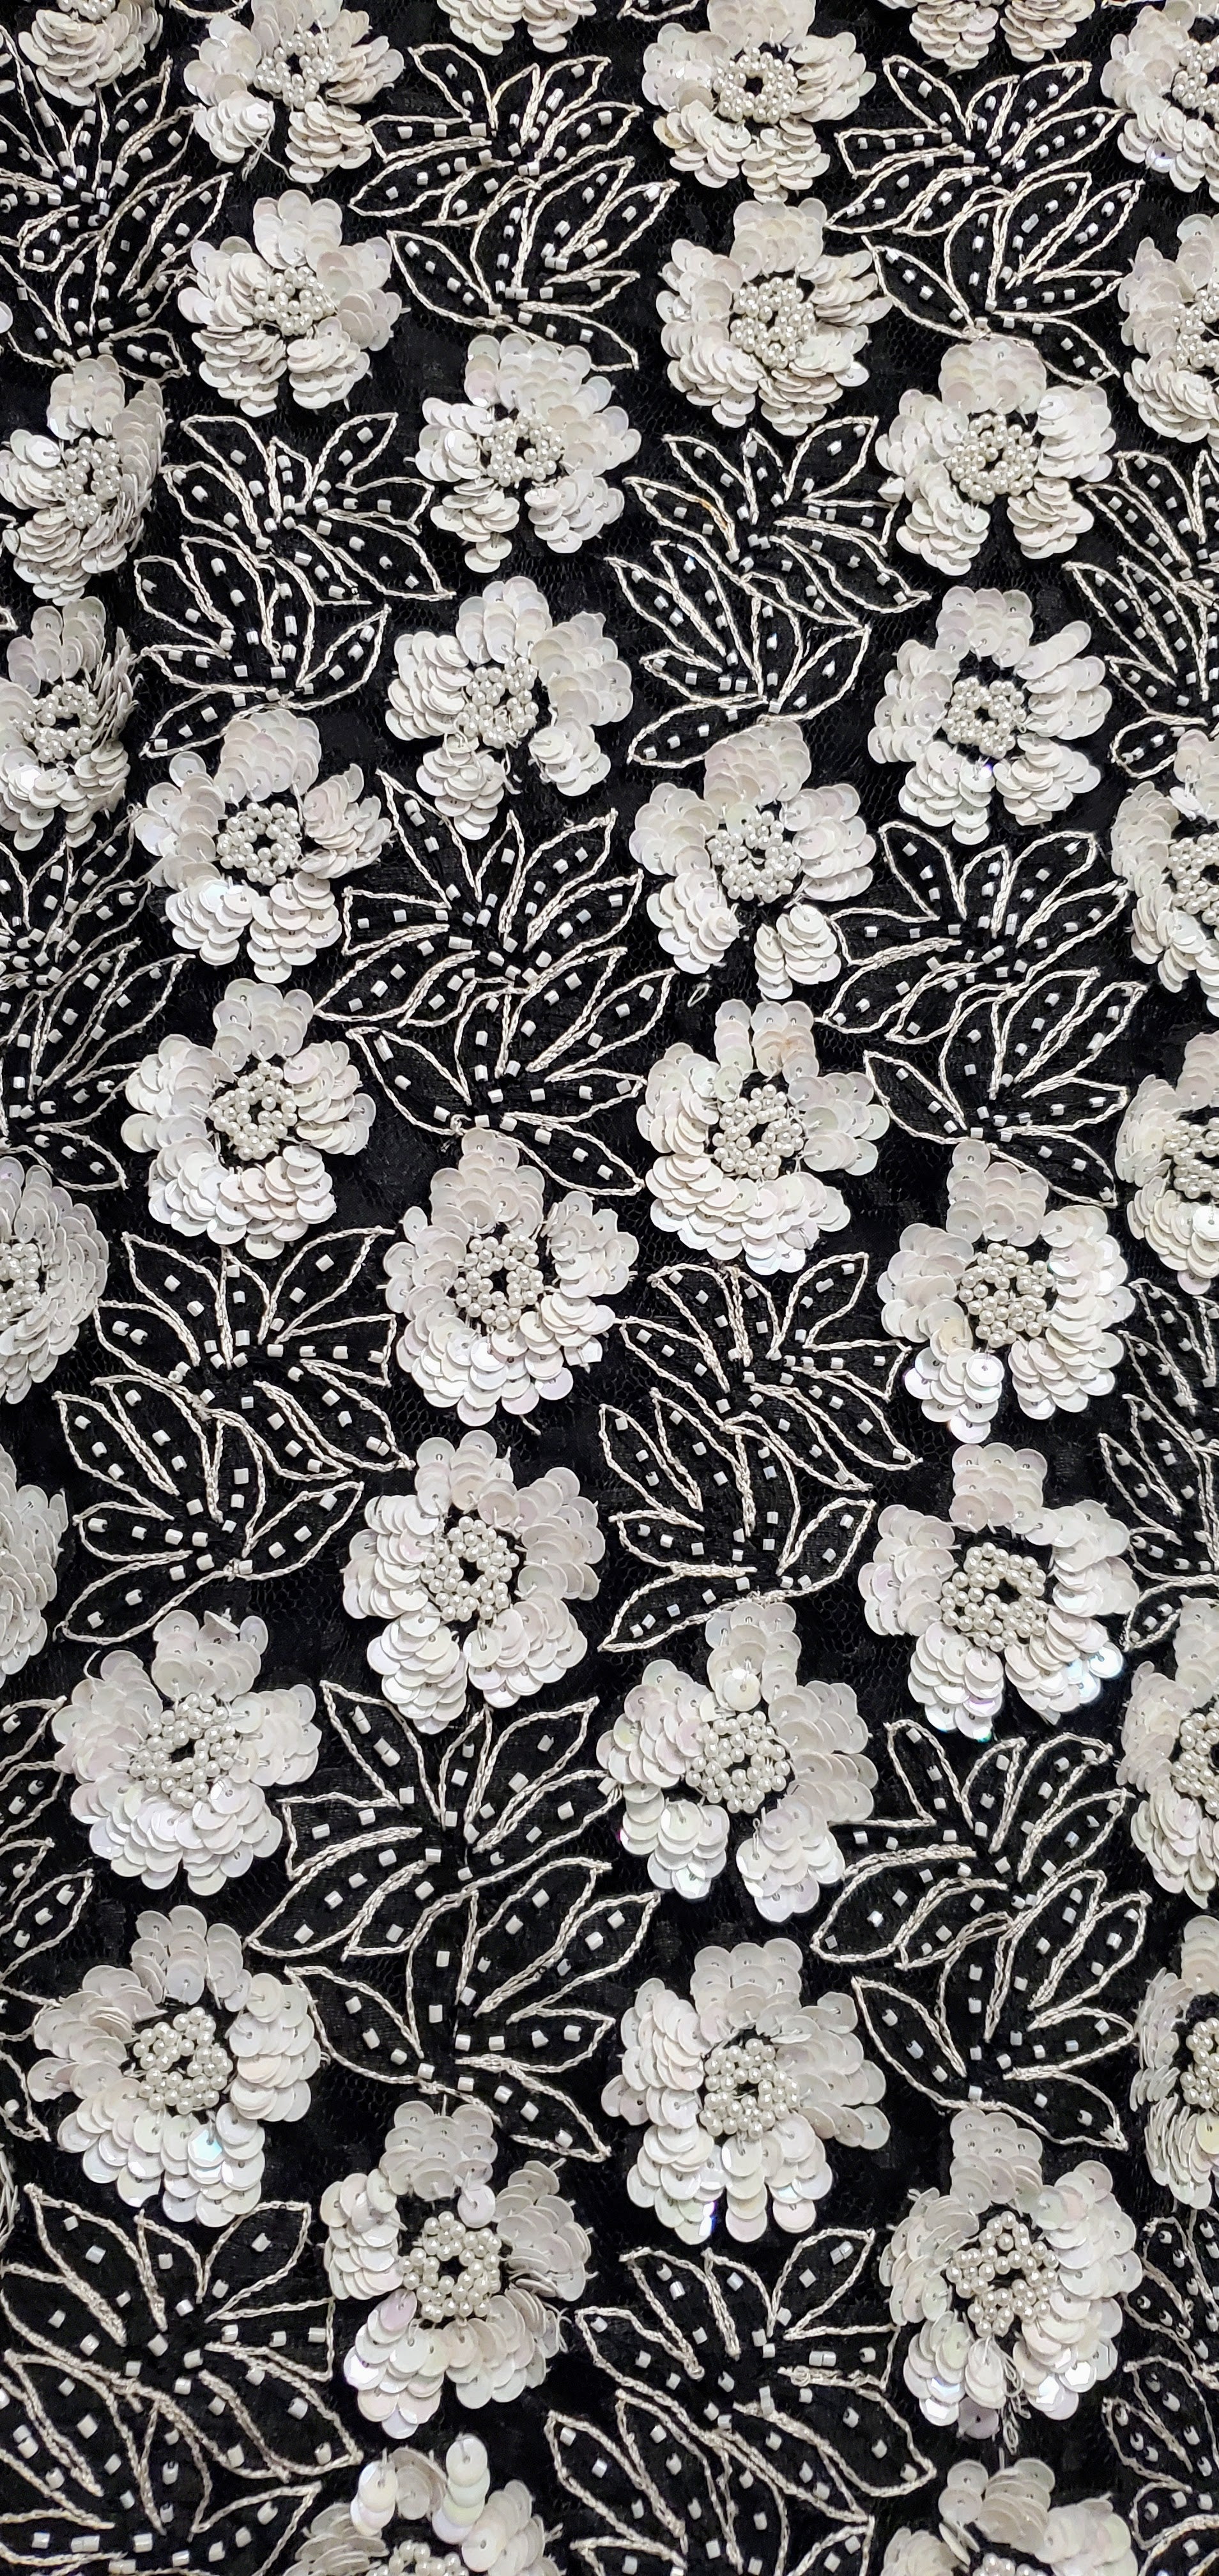 Close up view of the beading and sequins of Vintage 80s Black and White Beaded Floral Top